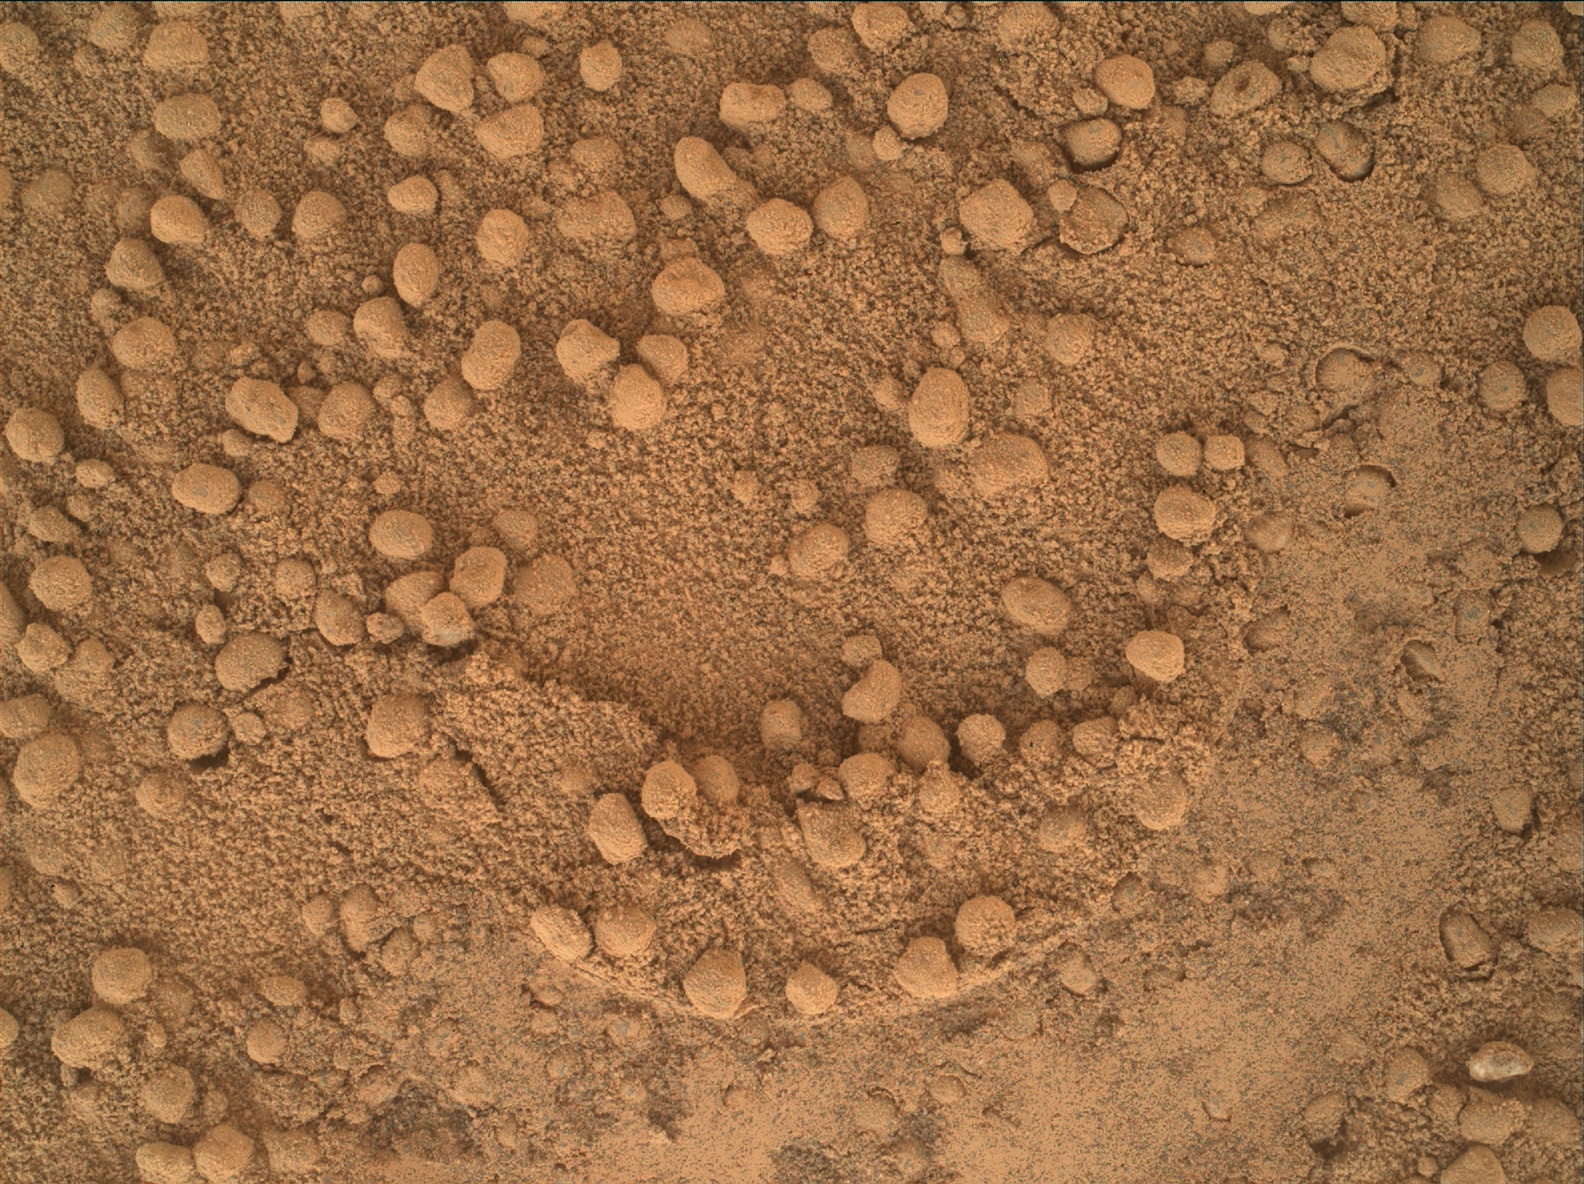 Nasa's Mars rover Curiosity acquired this image using its Mars Hand Lens Imager (MAHLI) on Sol 531